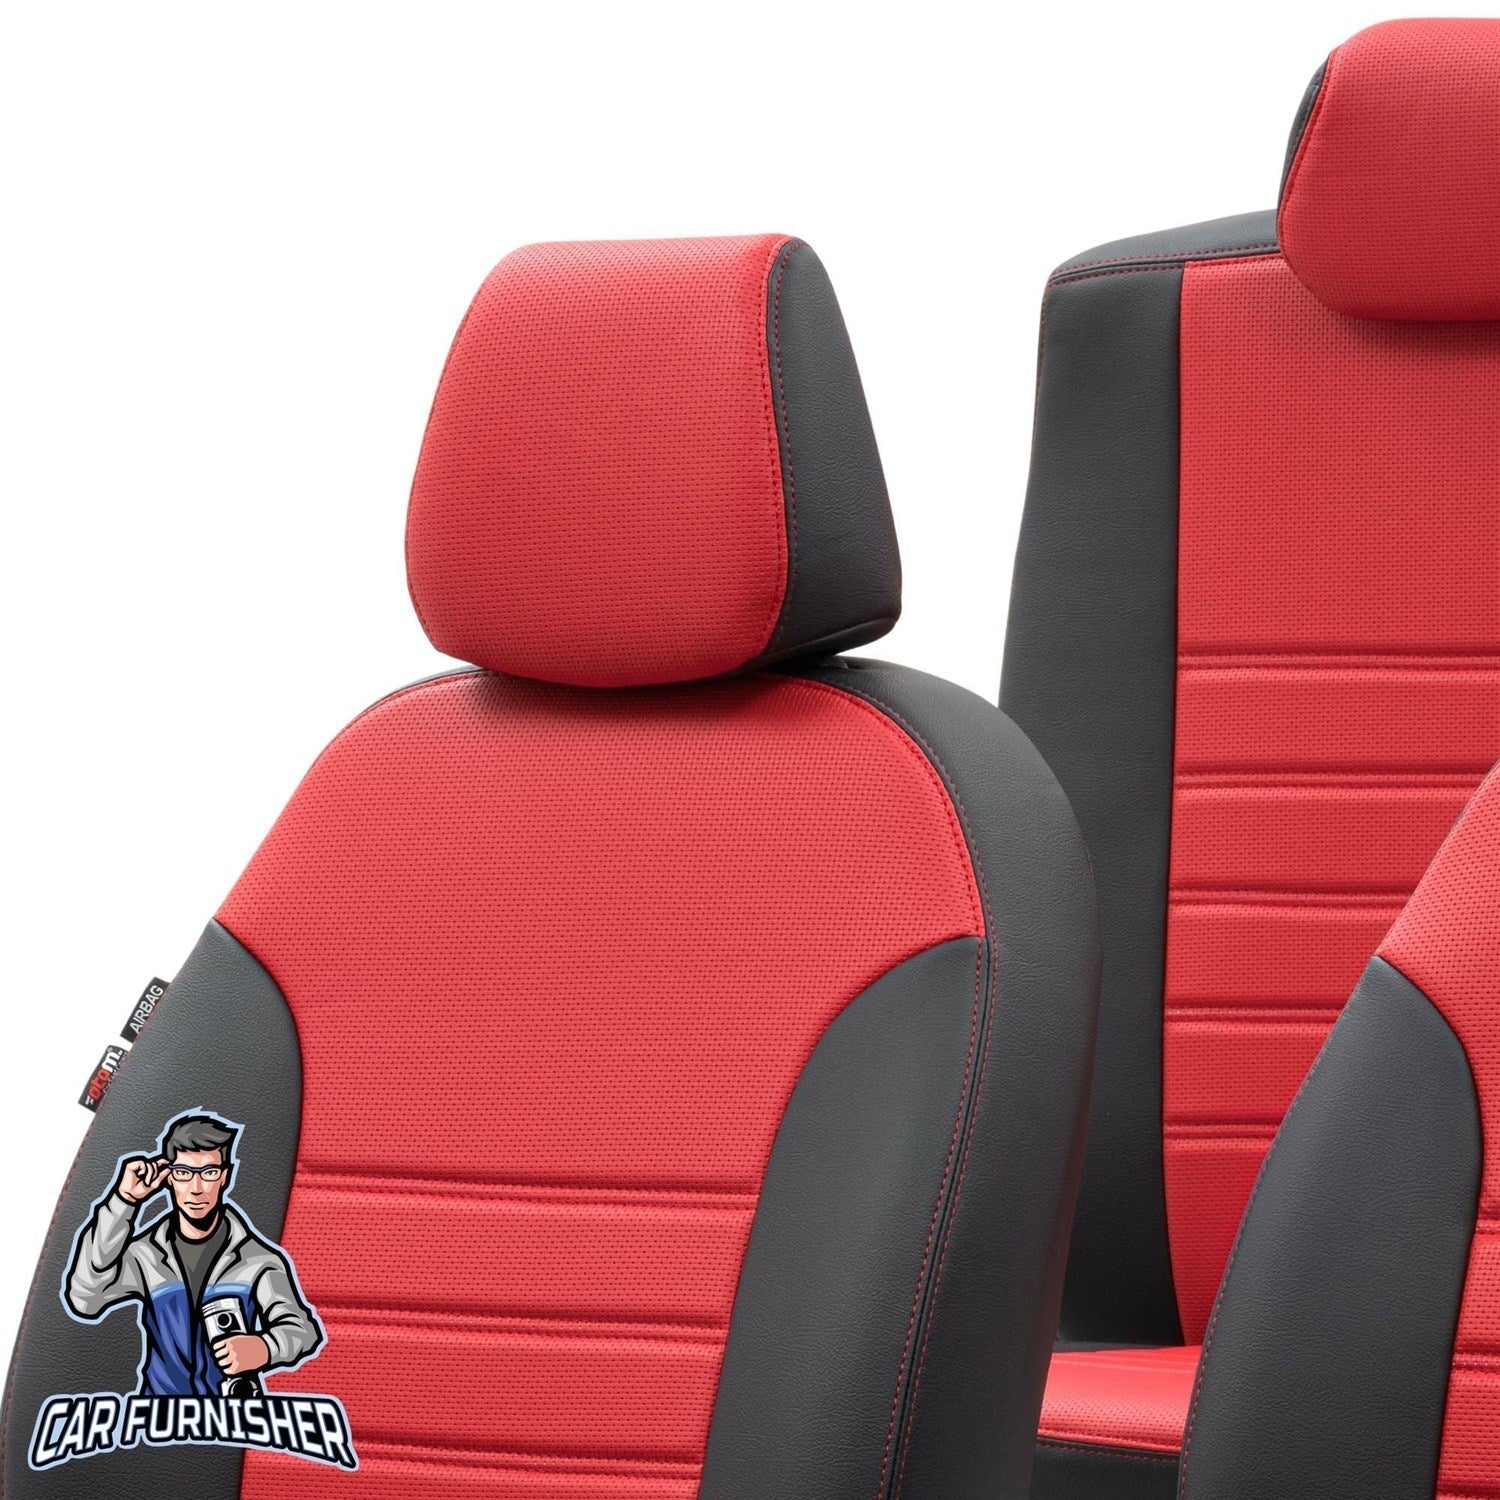 Renault 19 Seat Cover New York Leather Design Red Leather